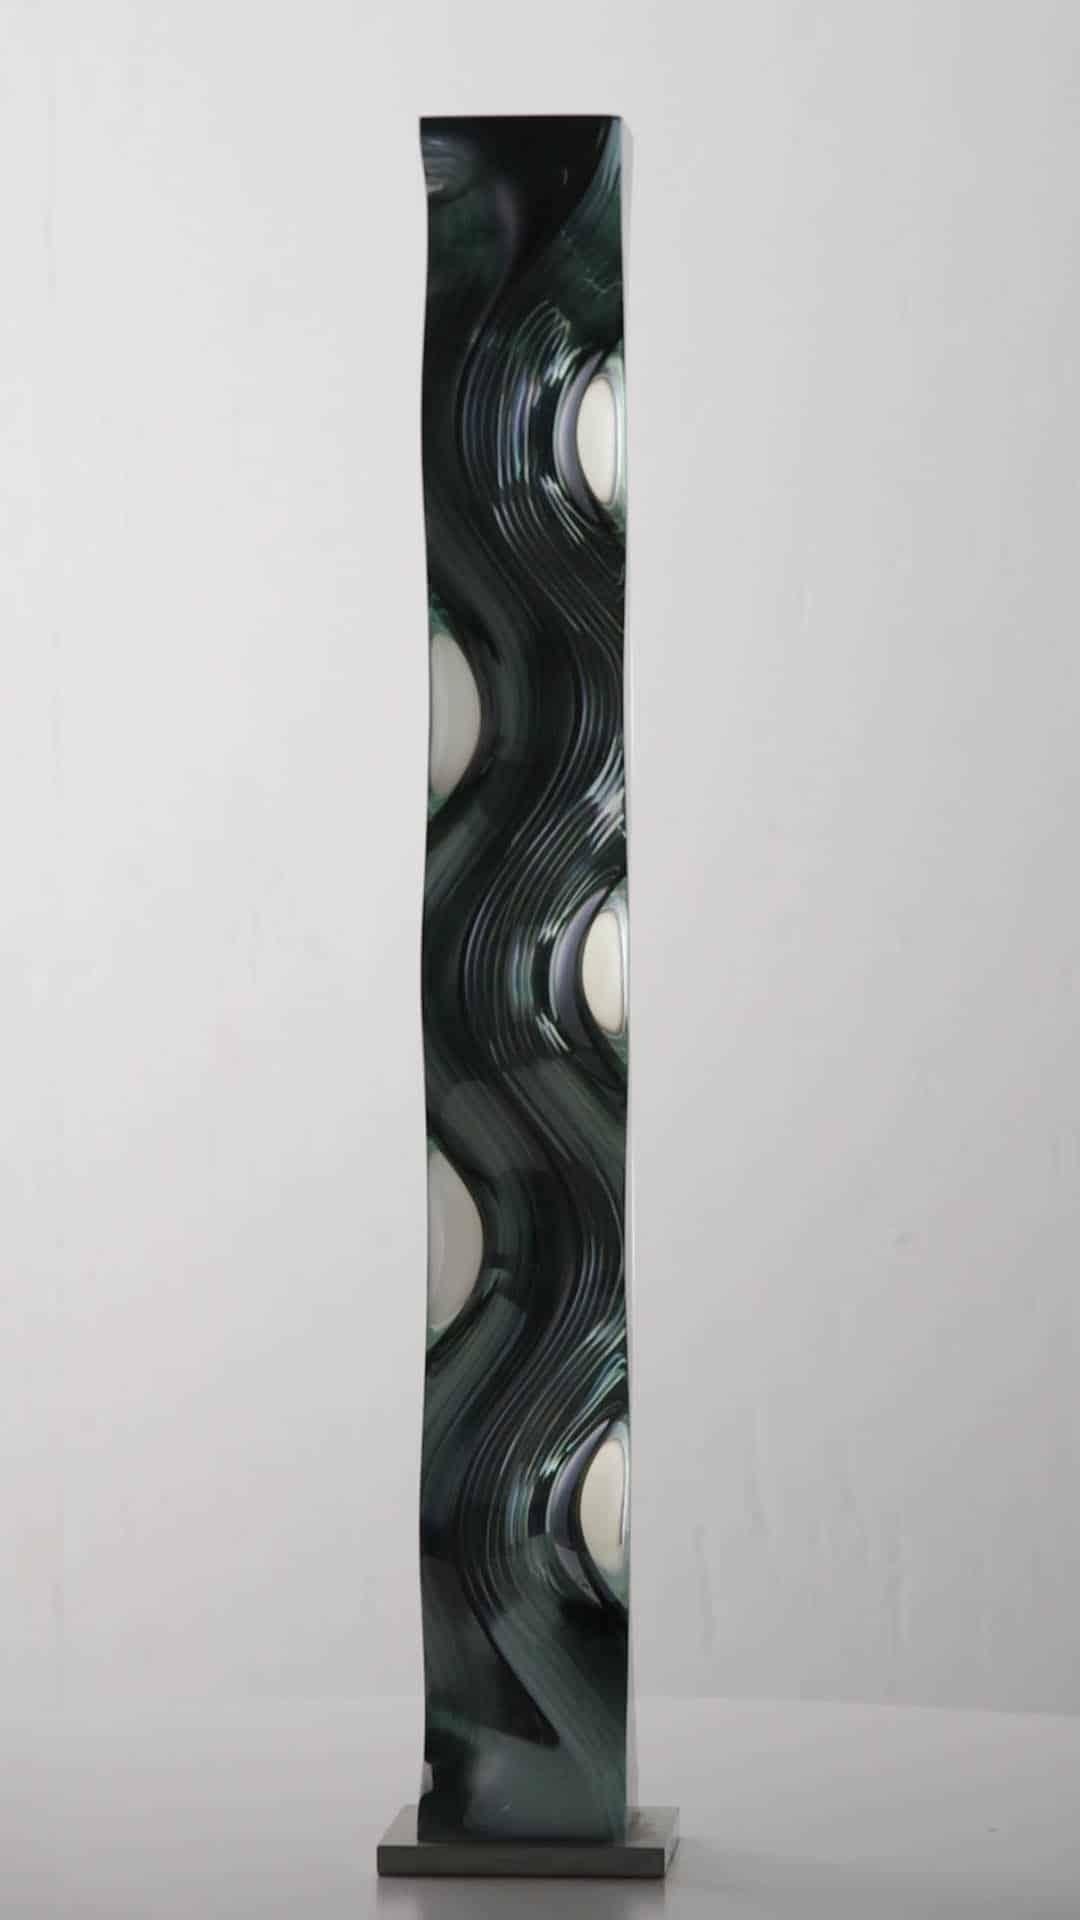 M.180601 by Toshio Iezumi - Contemporary glass sculpture, green, abstract For Sale 3